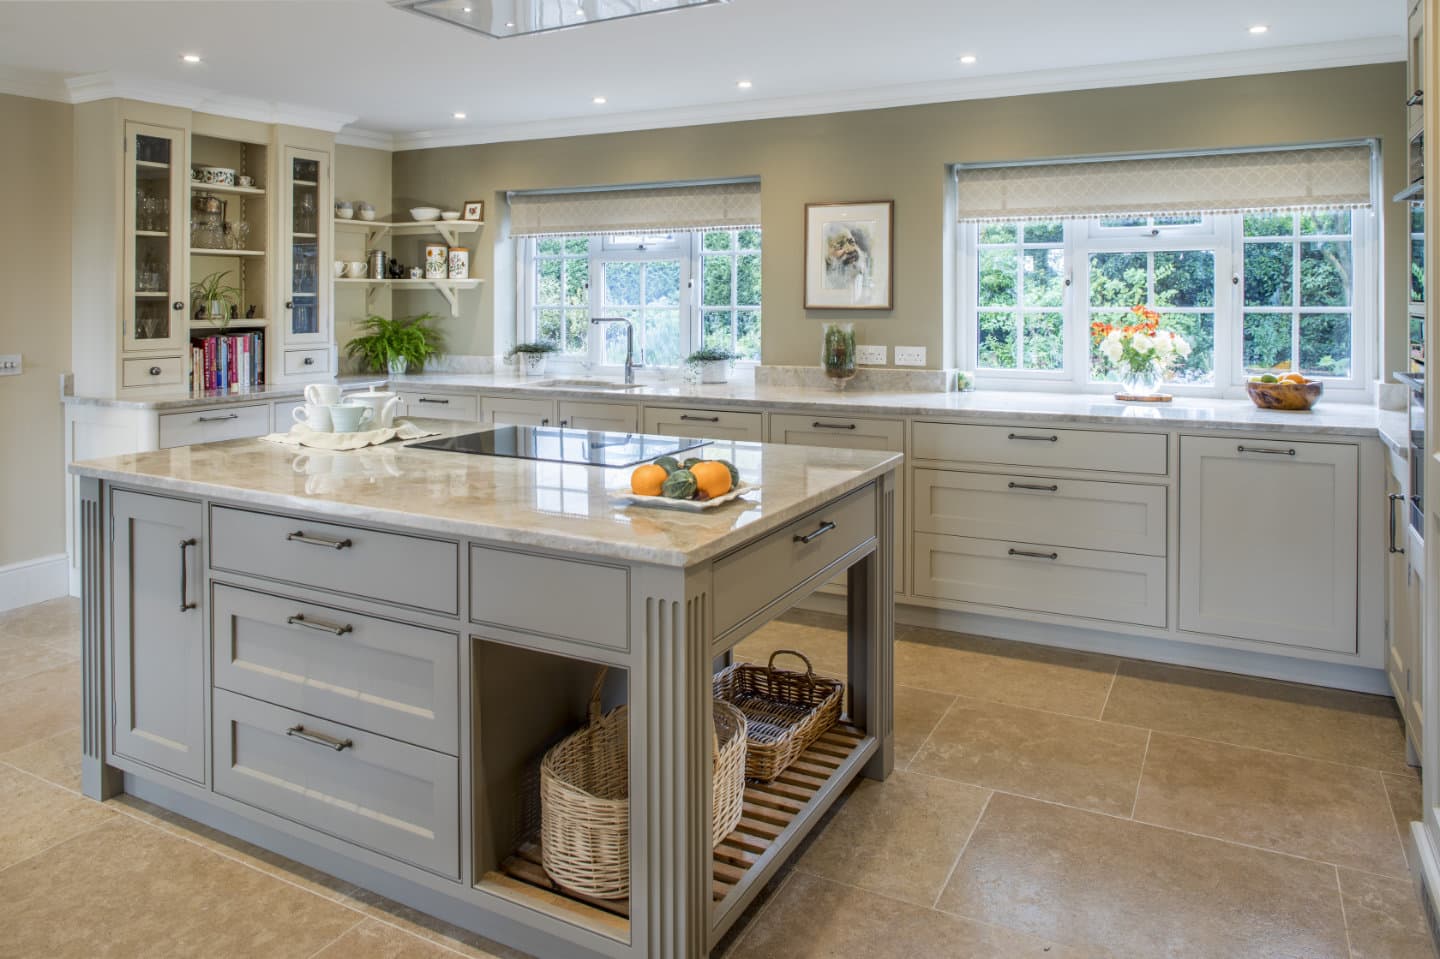 A kitchen island in the centre of a bespoke fitted kitchen.